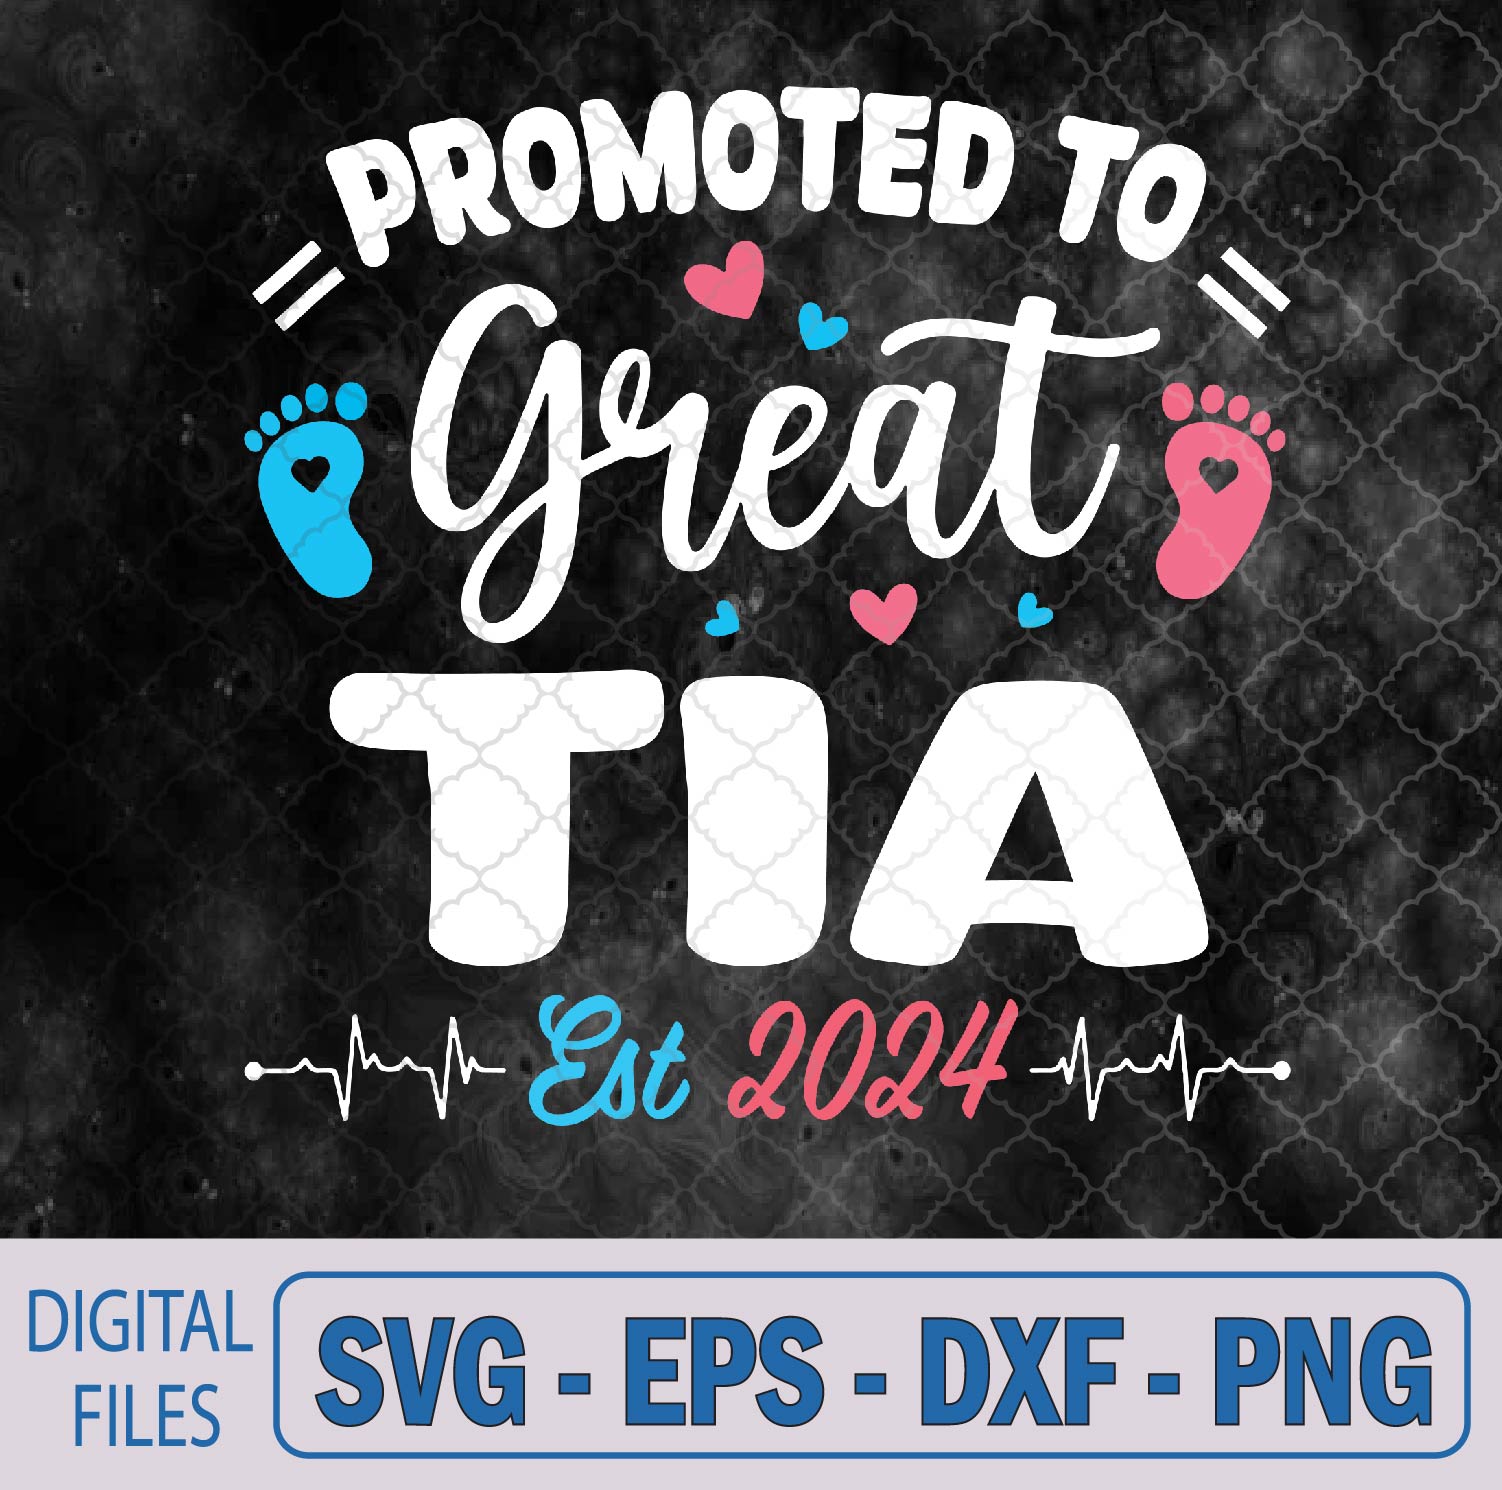 WTMNEW9file 09 298 Gender Reveal Promoted To Tia Est 2024 Mothers Day Svg, Png, Digital Download